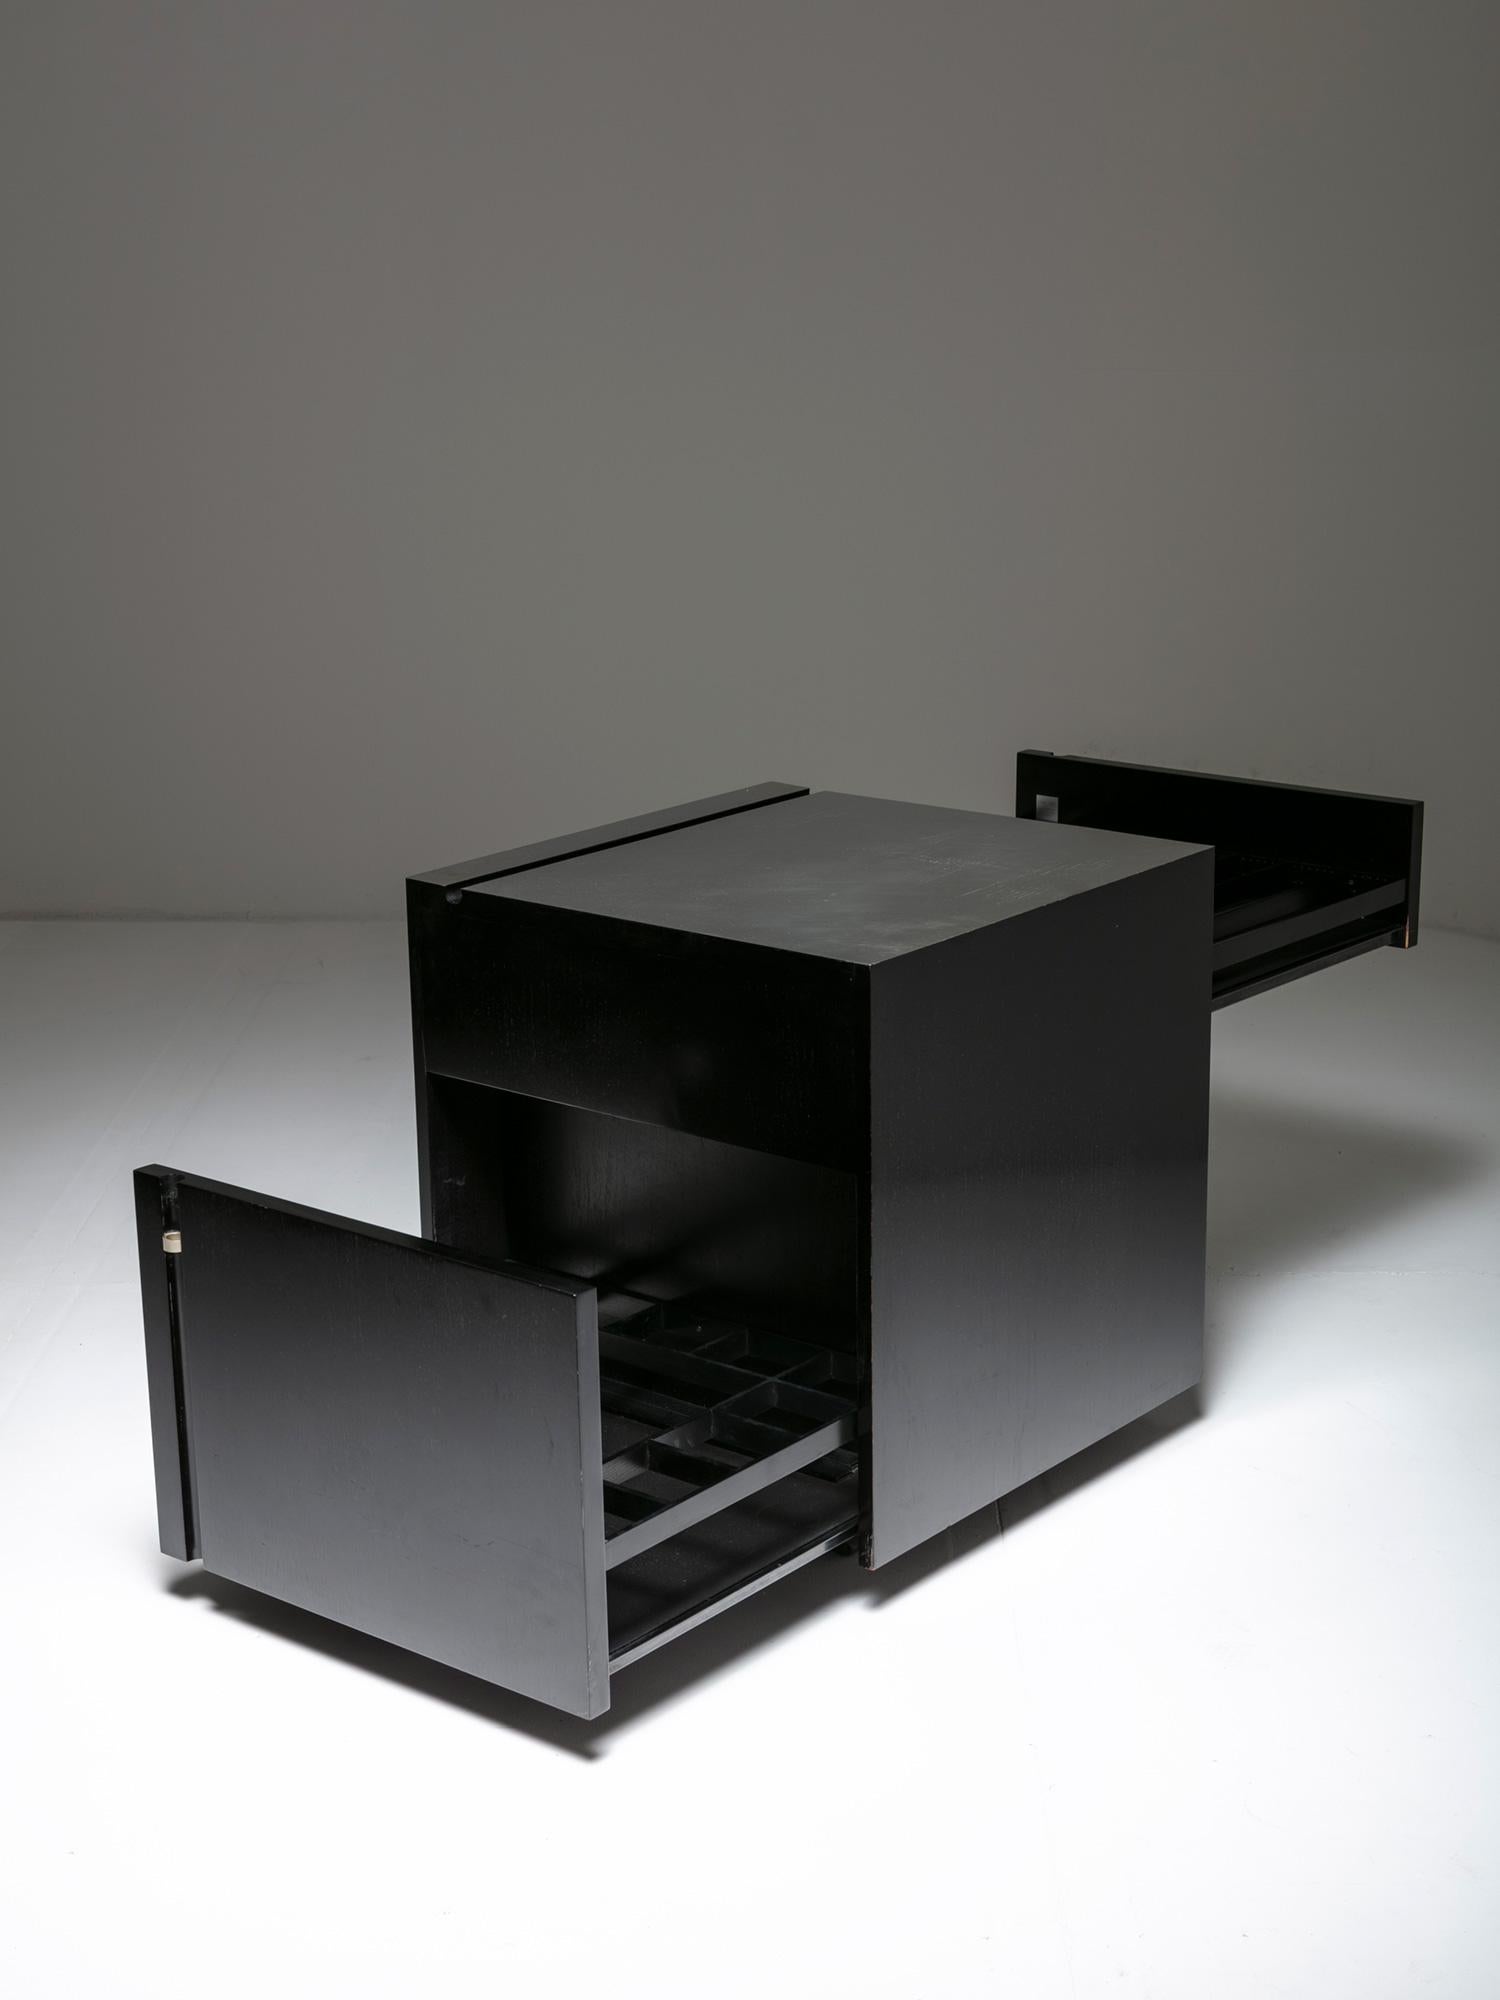 Cubo bar by Studio O.P.I. for Cini & Nils.
Sleek capable piece with two drawers ready to host up to 25 bottles and 50 glasses.